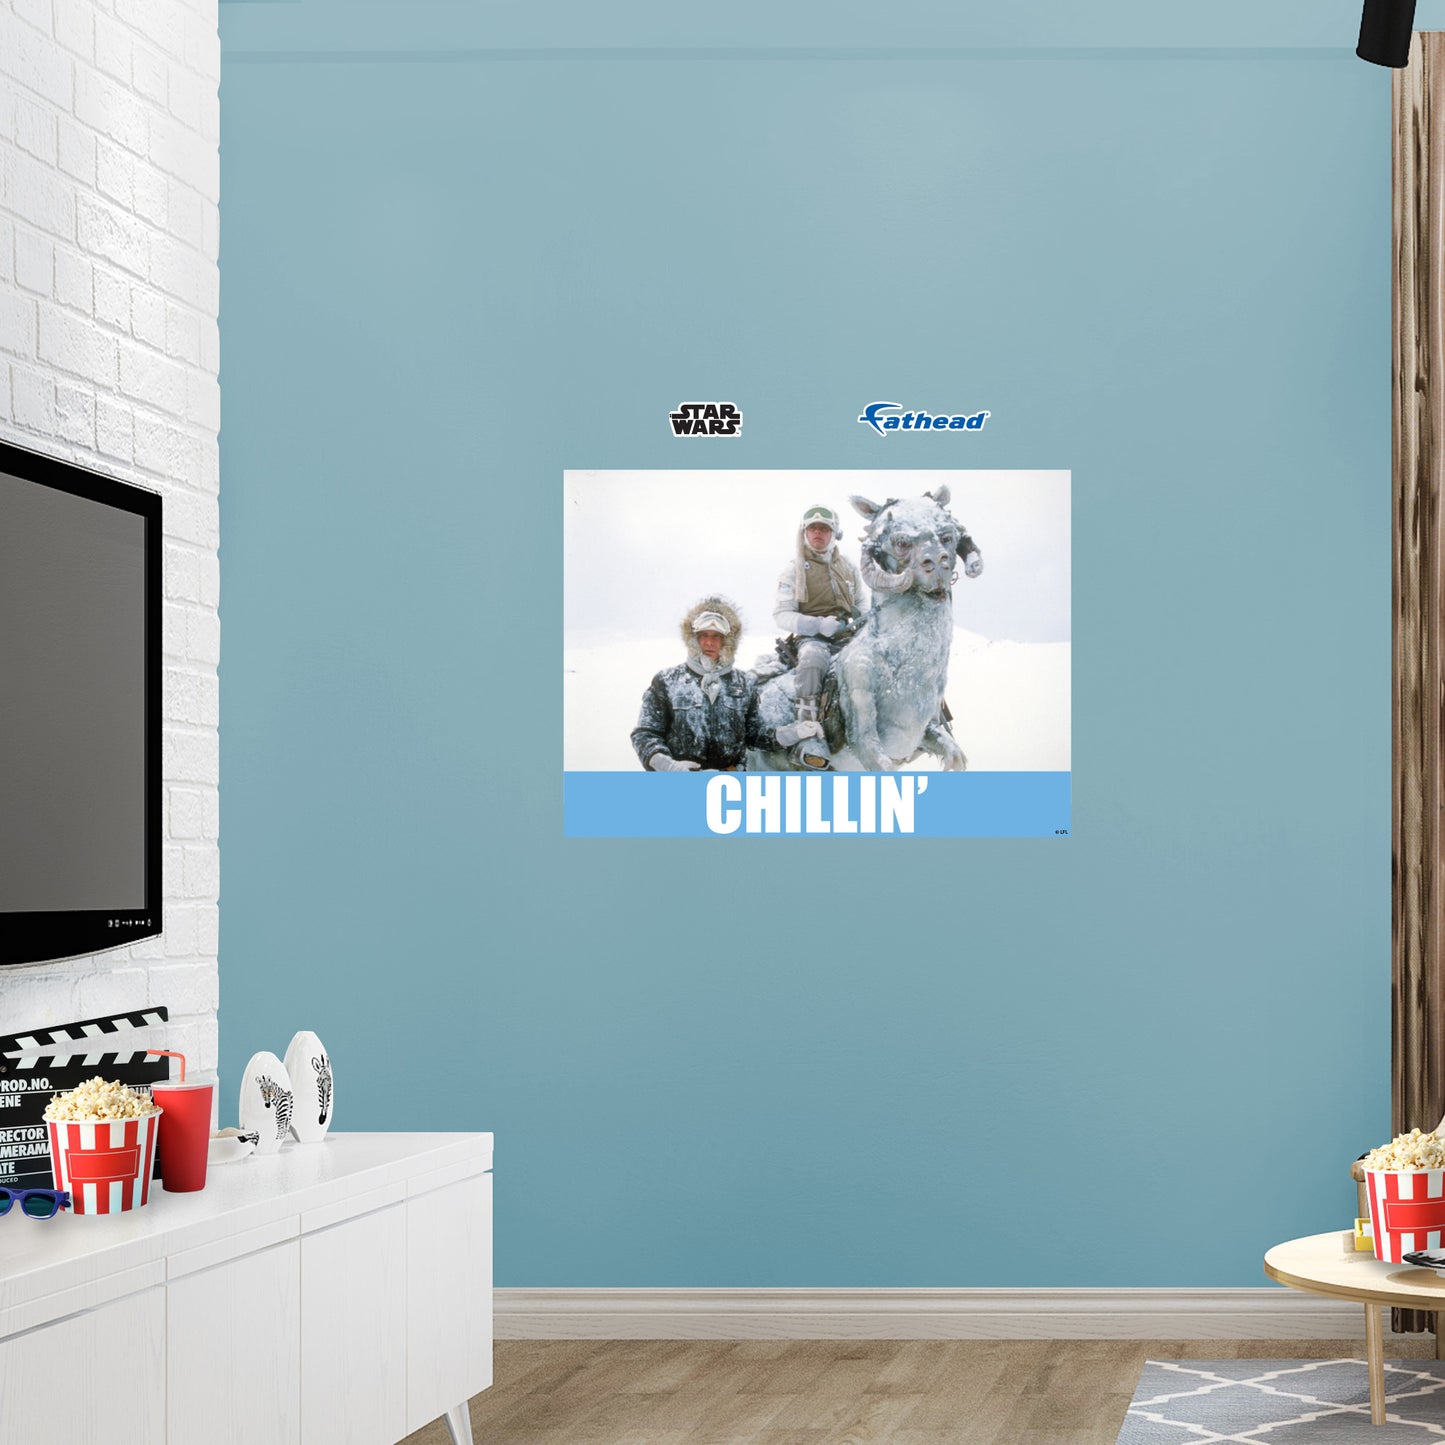 Chillin' meme Poster        - Officially Licensed Star Wars Removable     Adhesive Decal